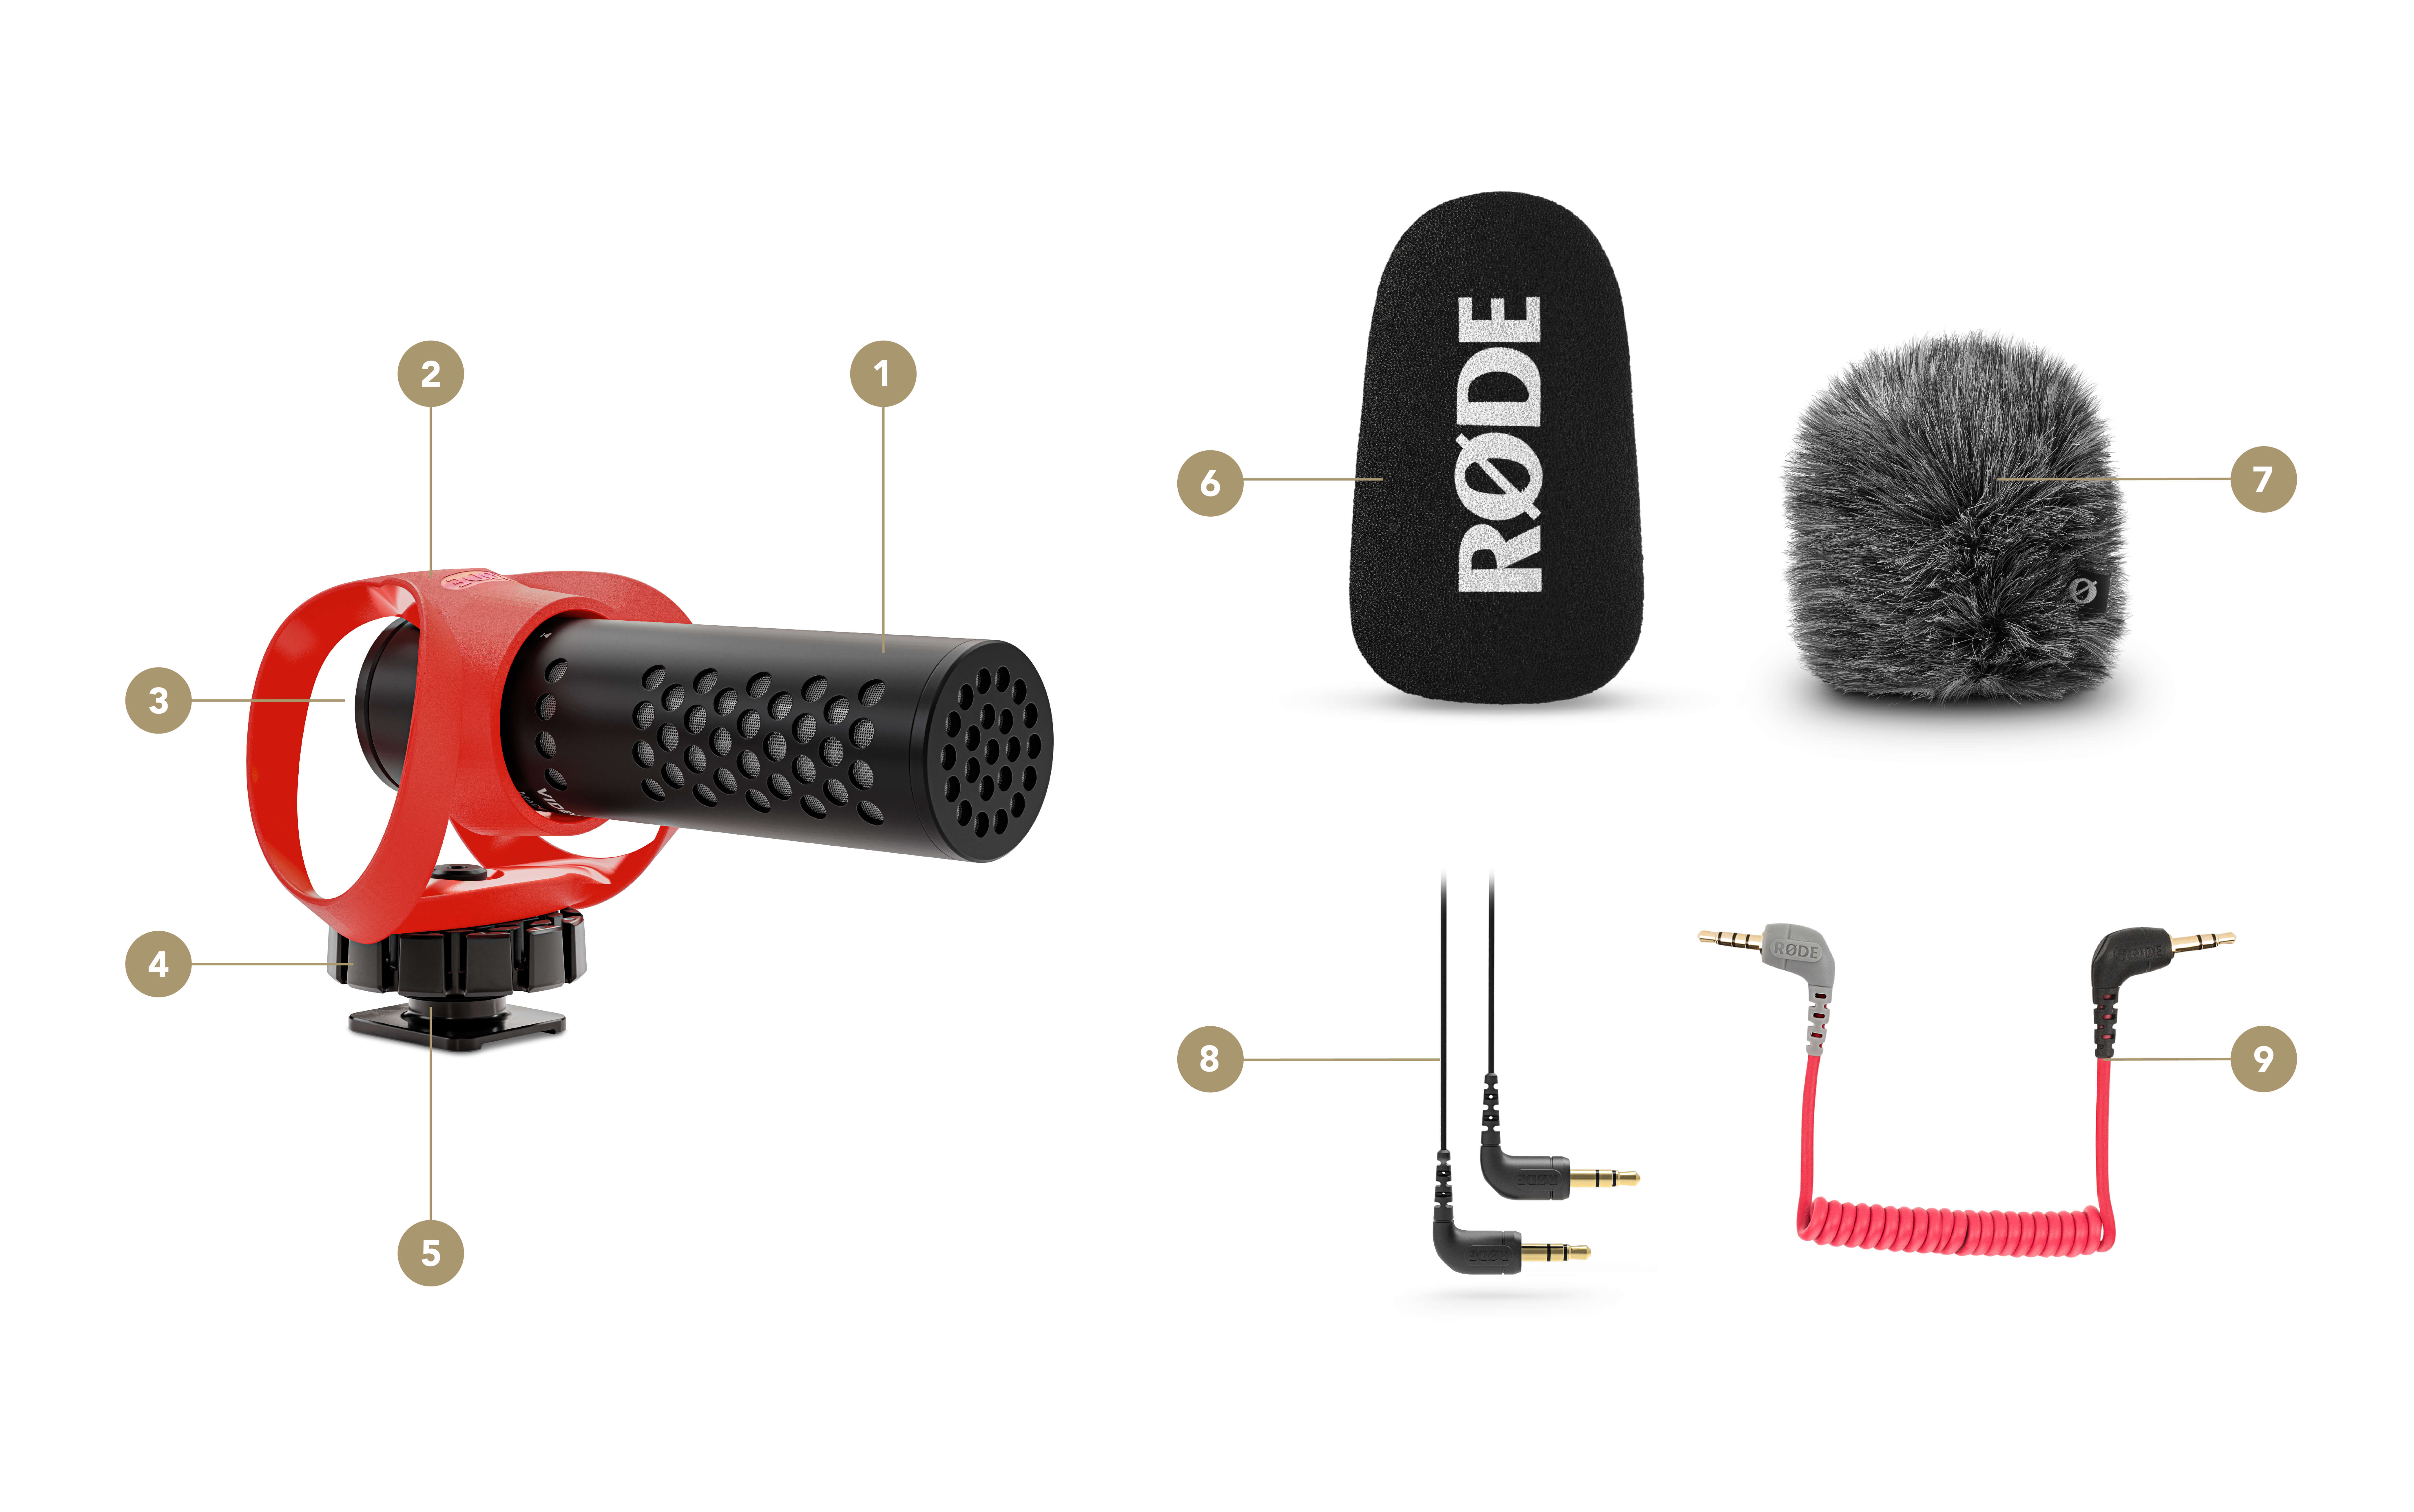 VideoMicro II What's In The Box with feature points